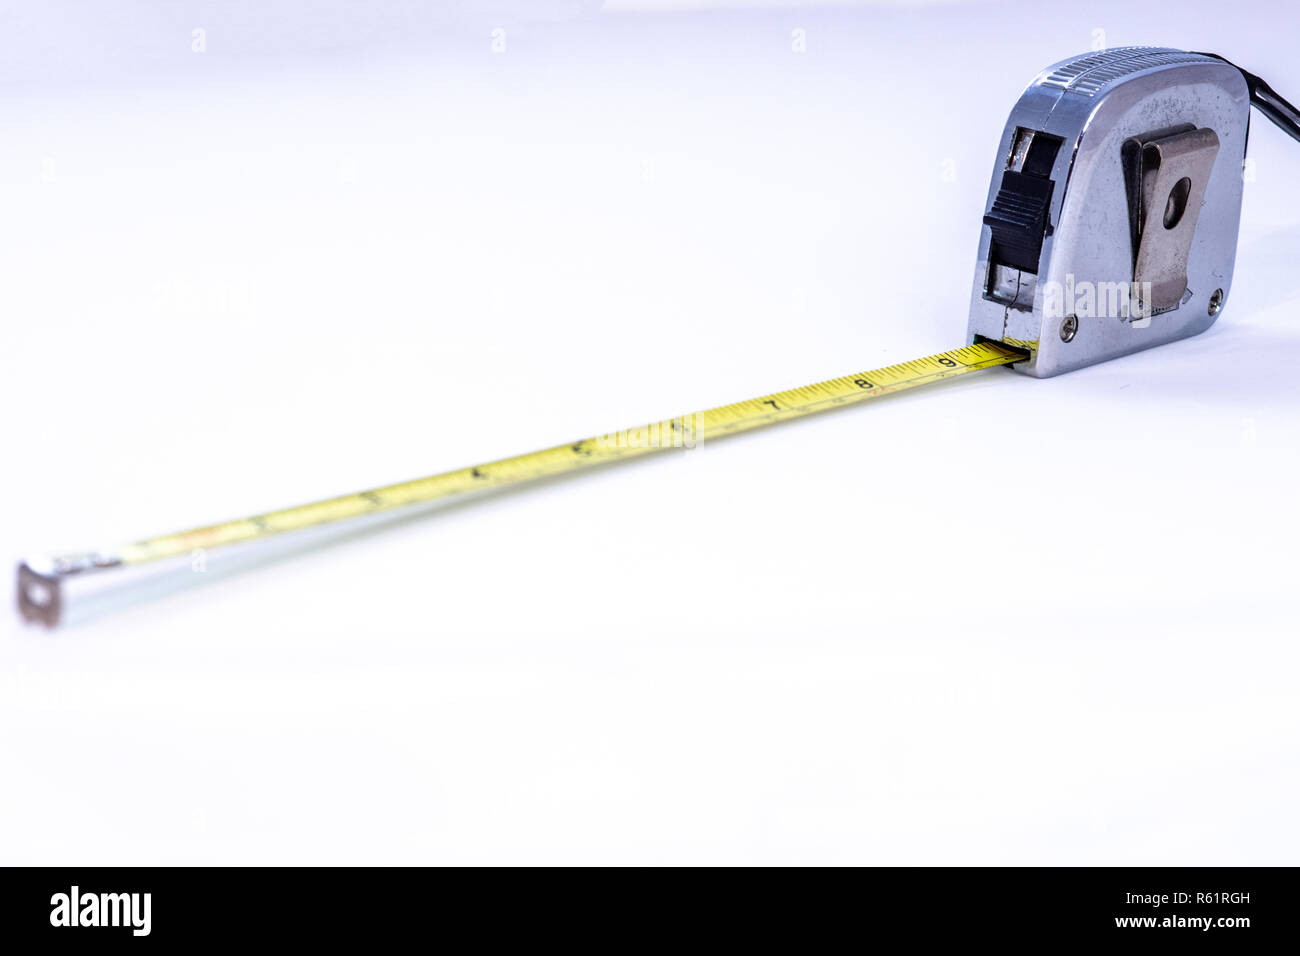 https://c8.alamy.com/comp/R61RGH/tape-measure-closeup-with-out-of-focus-elements-on-a-white-background-R61RGH.jpg